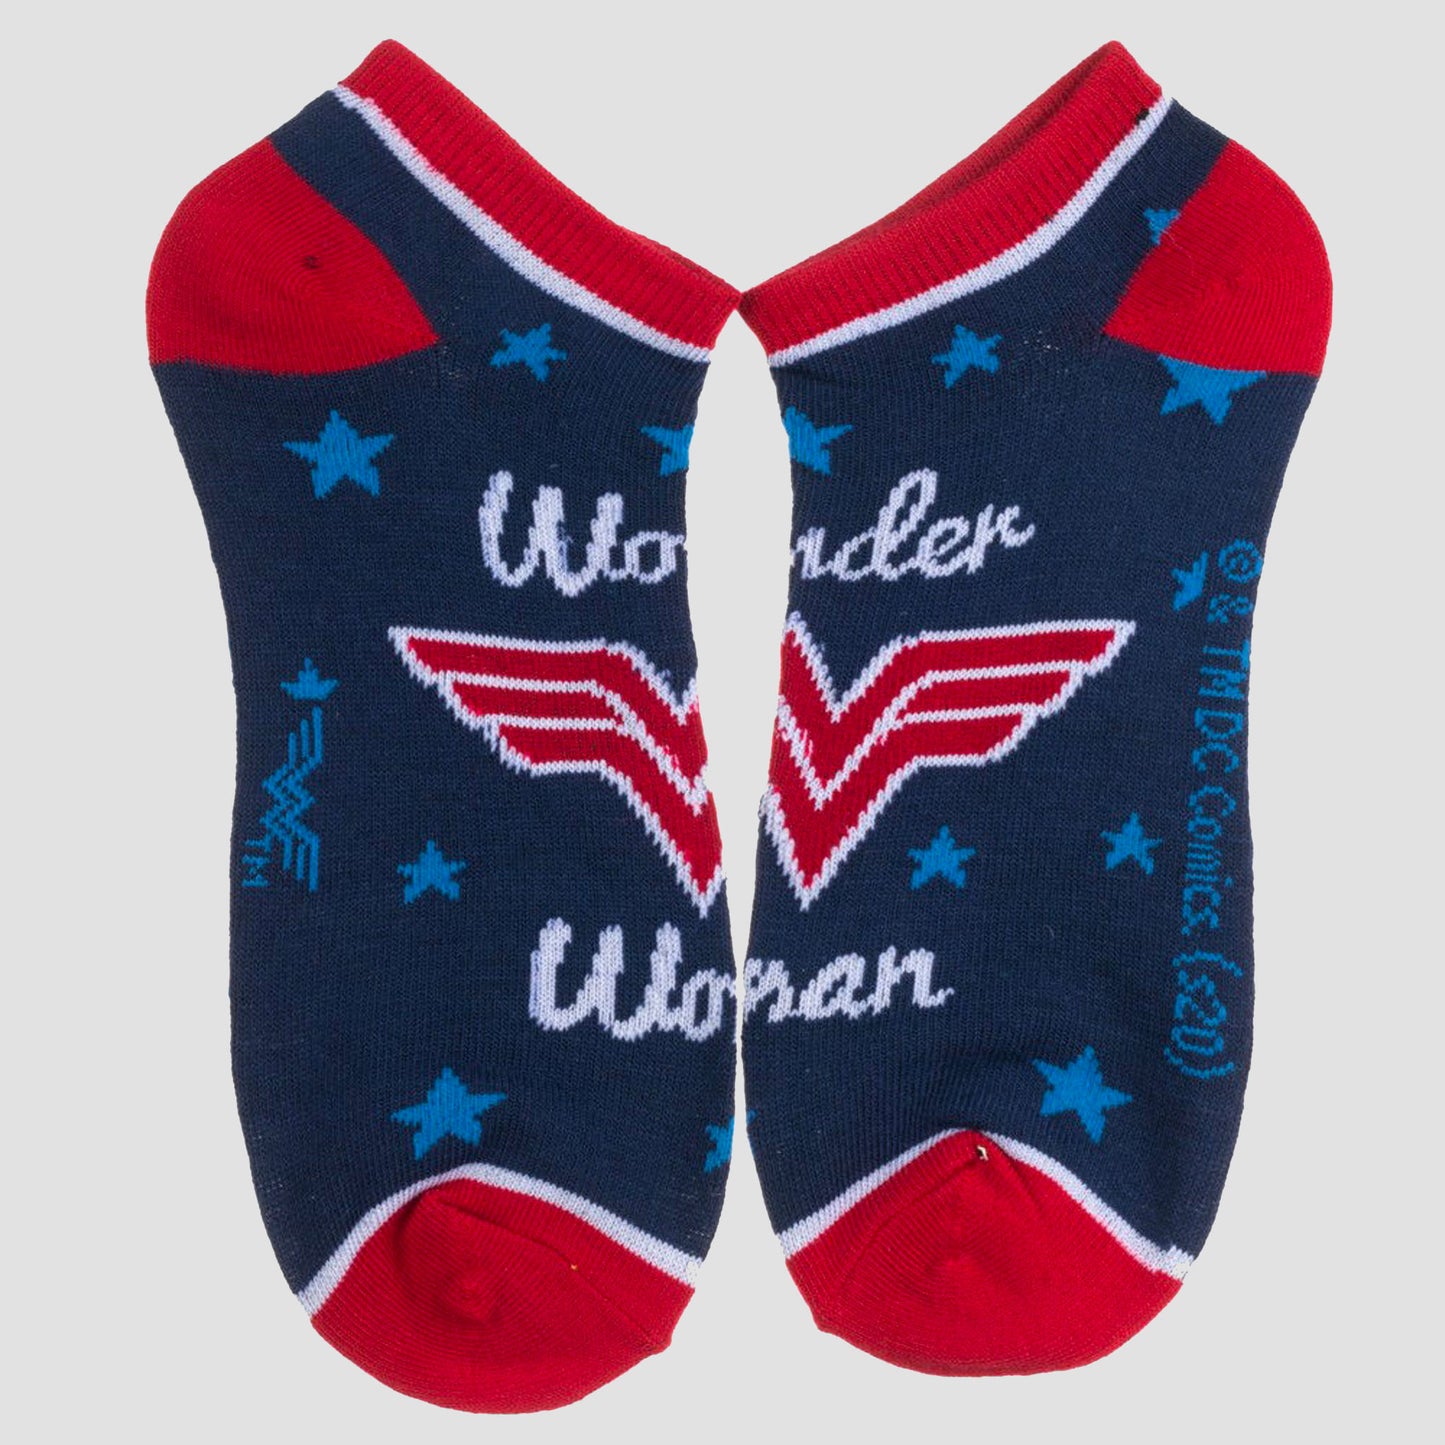 Load image into Gallery viewer, Wonder Woman (DC Comics) Ankle Socks Set
